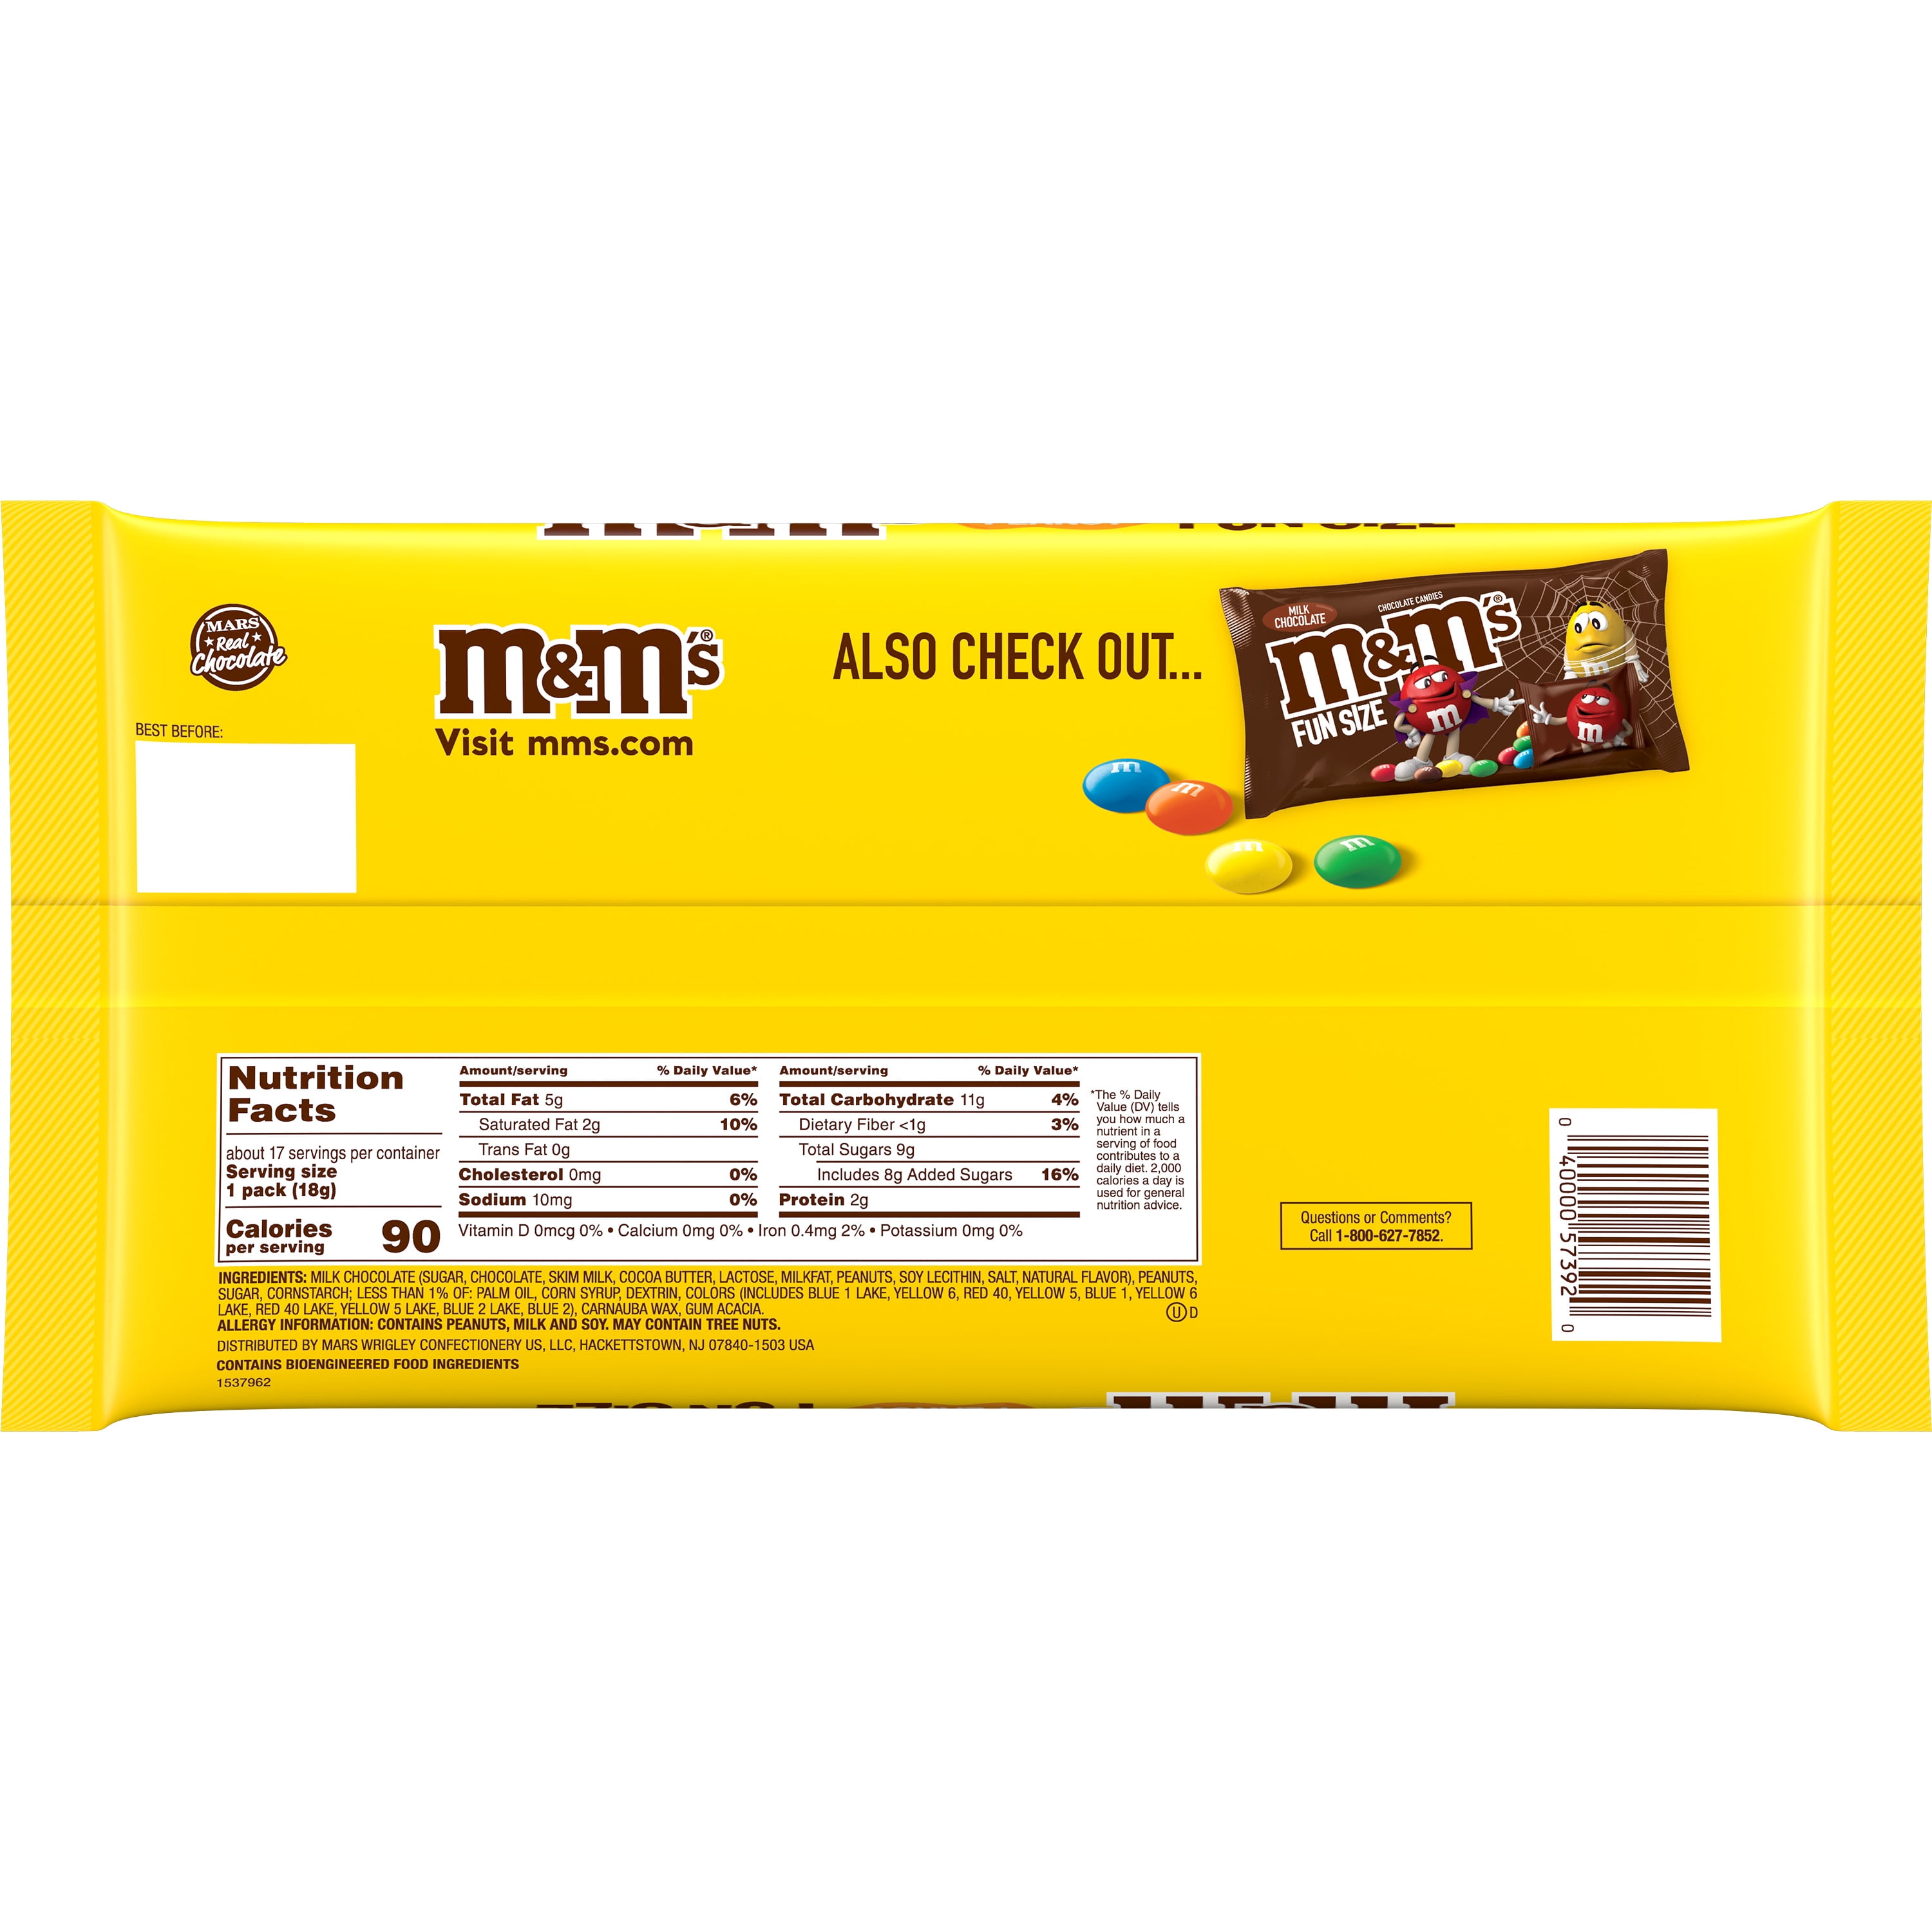 New Large Size M&ms Halloween Fun Size Peanut Candy Wrapper 